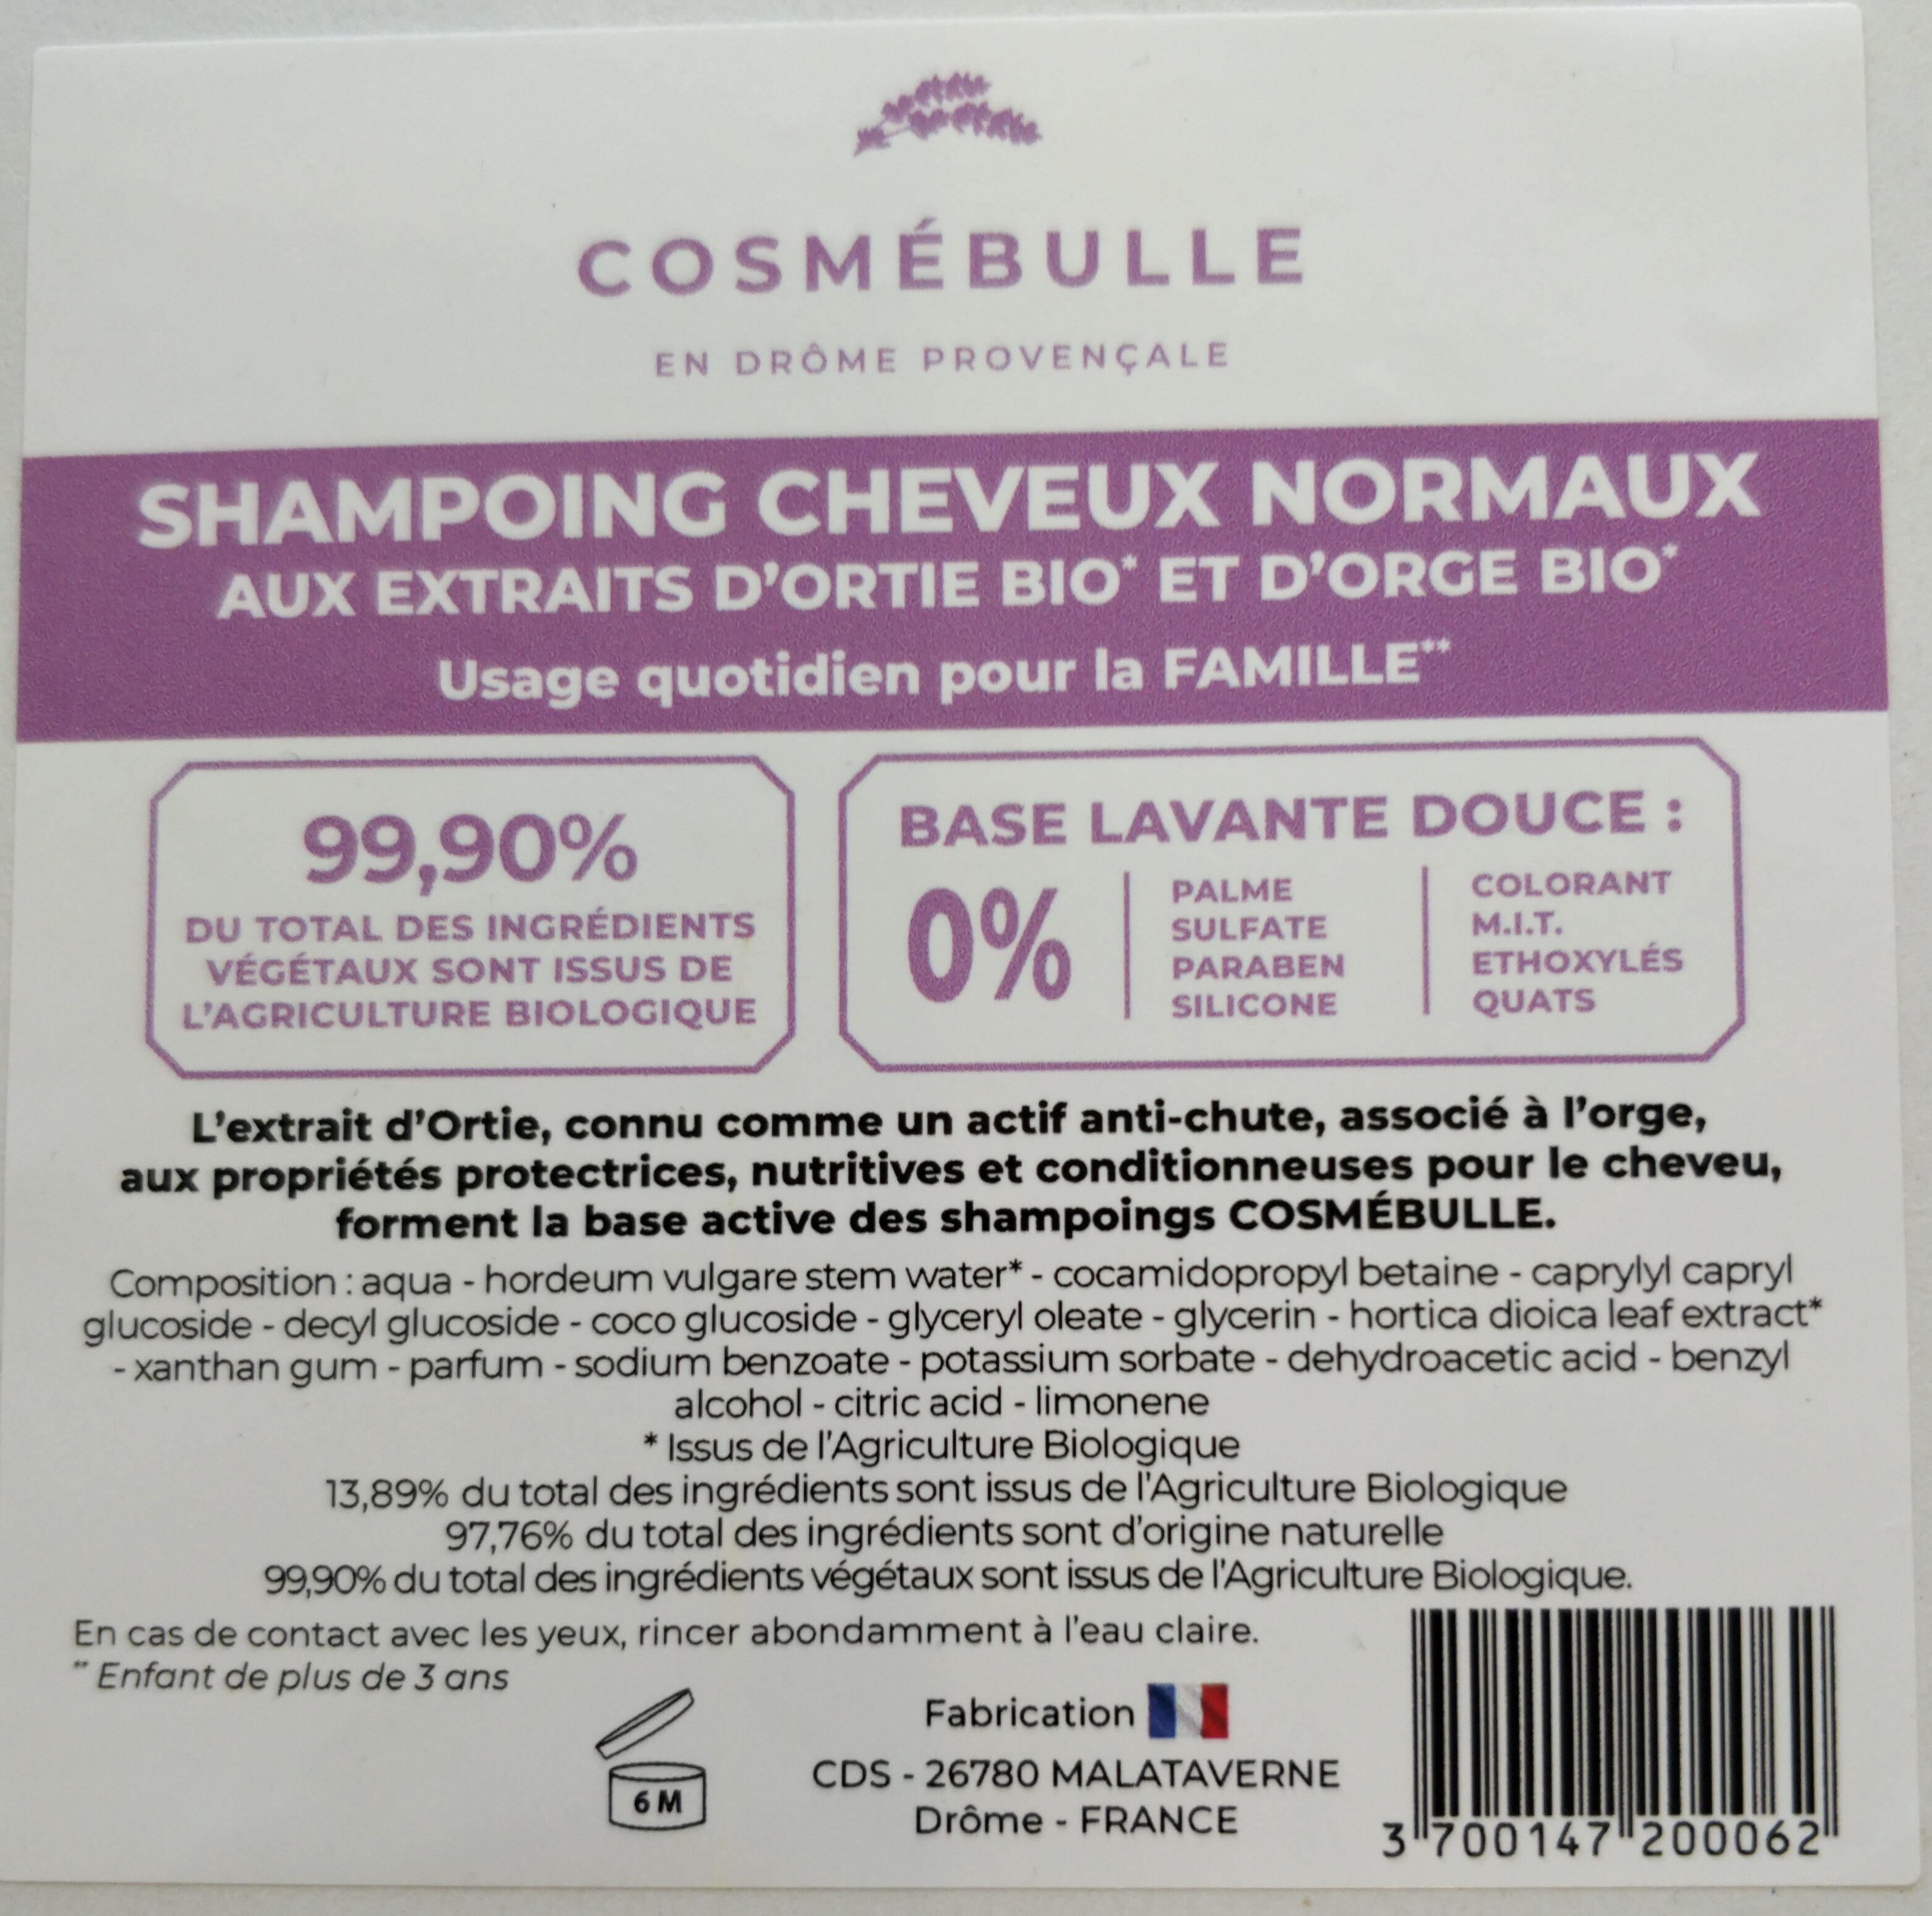 Shampoing cheveux normaux - Tuote - fr